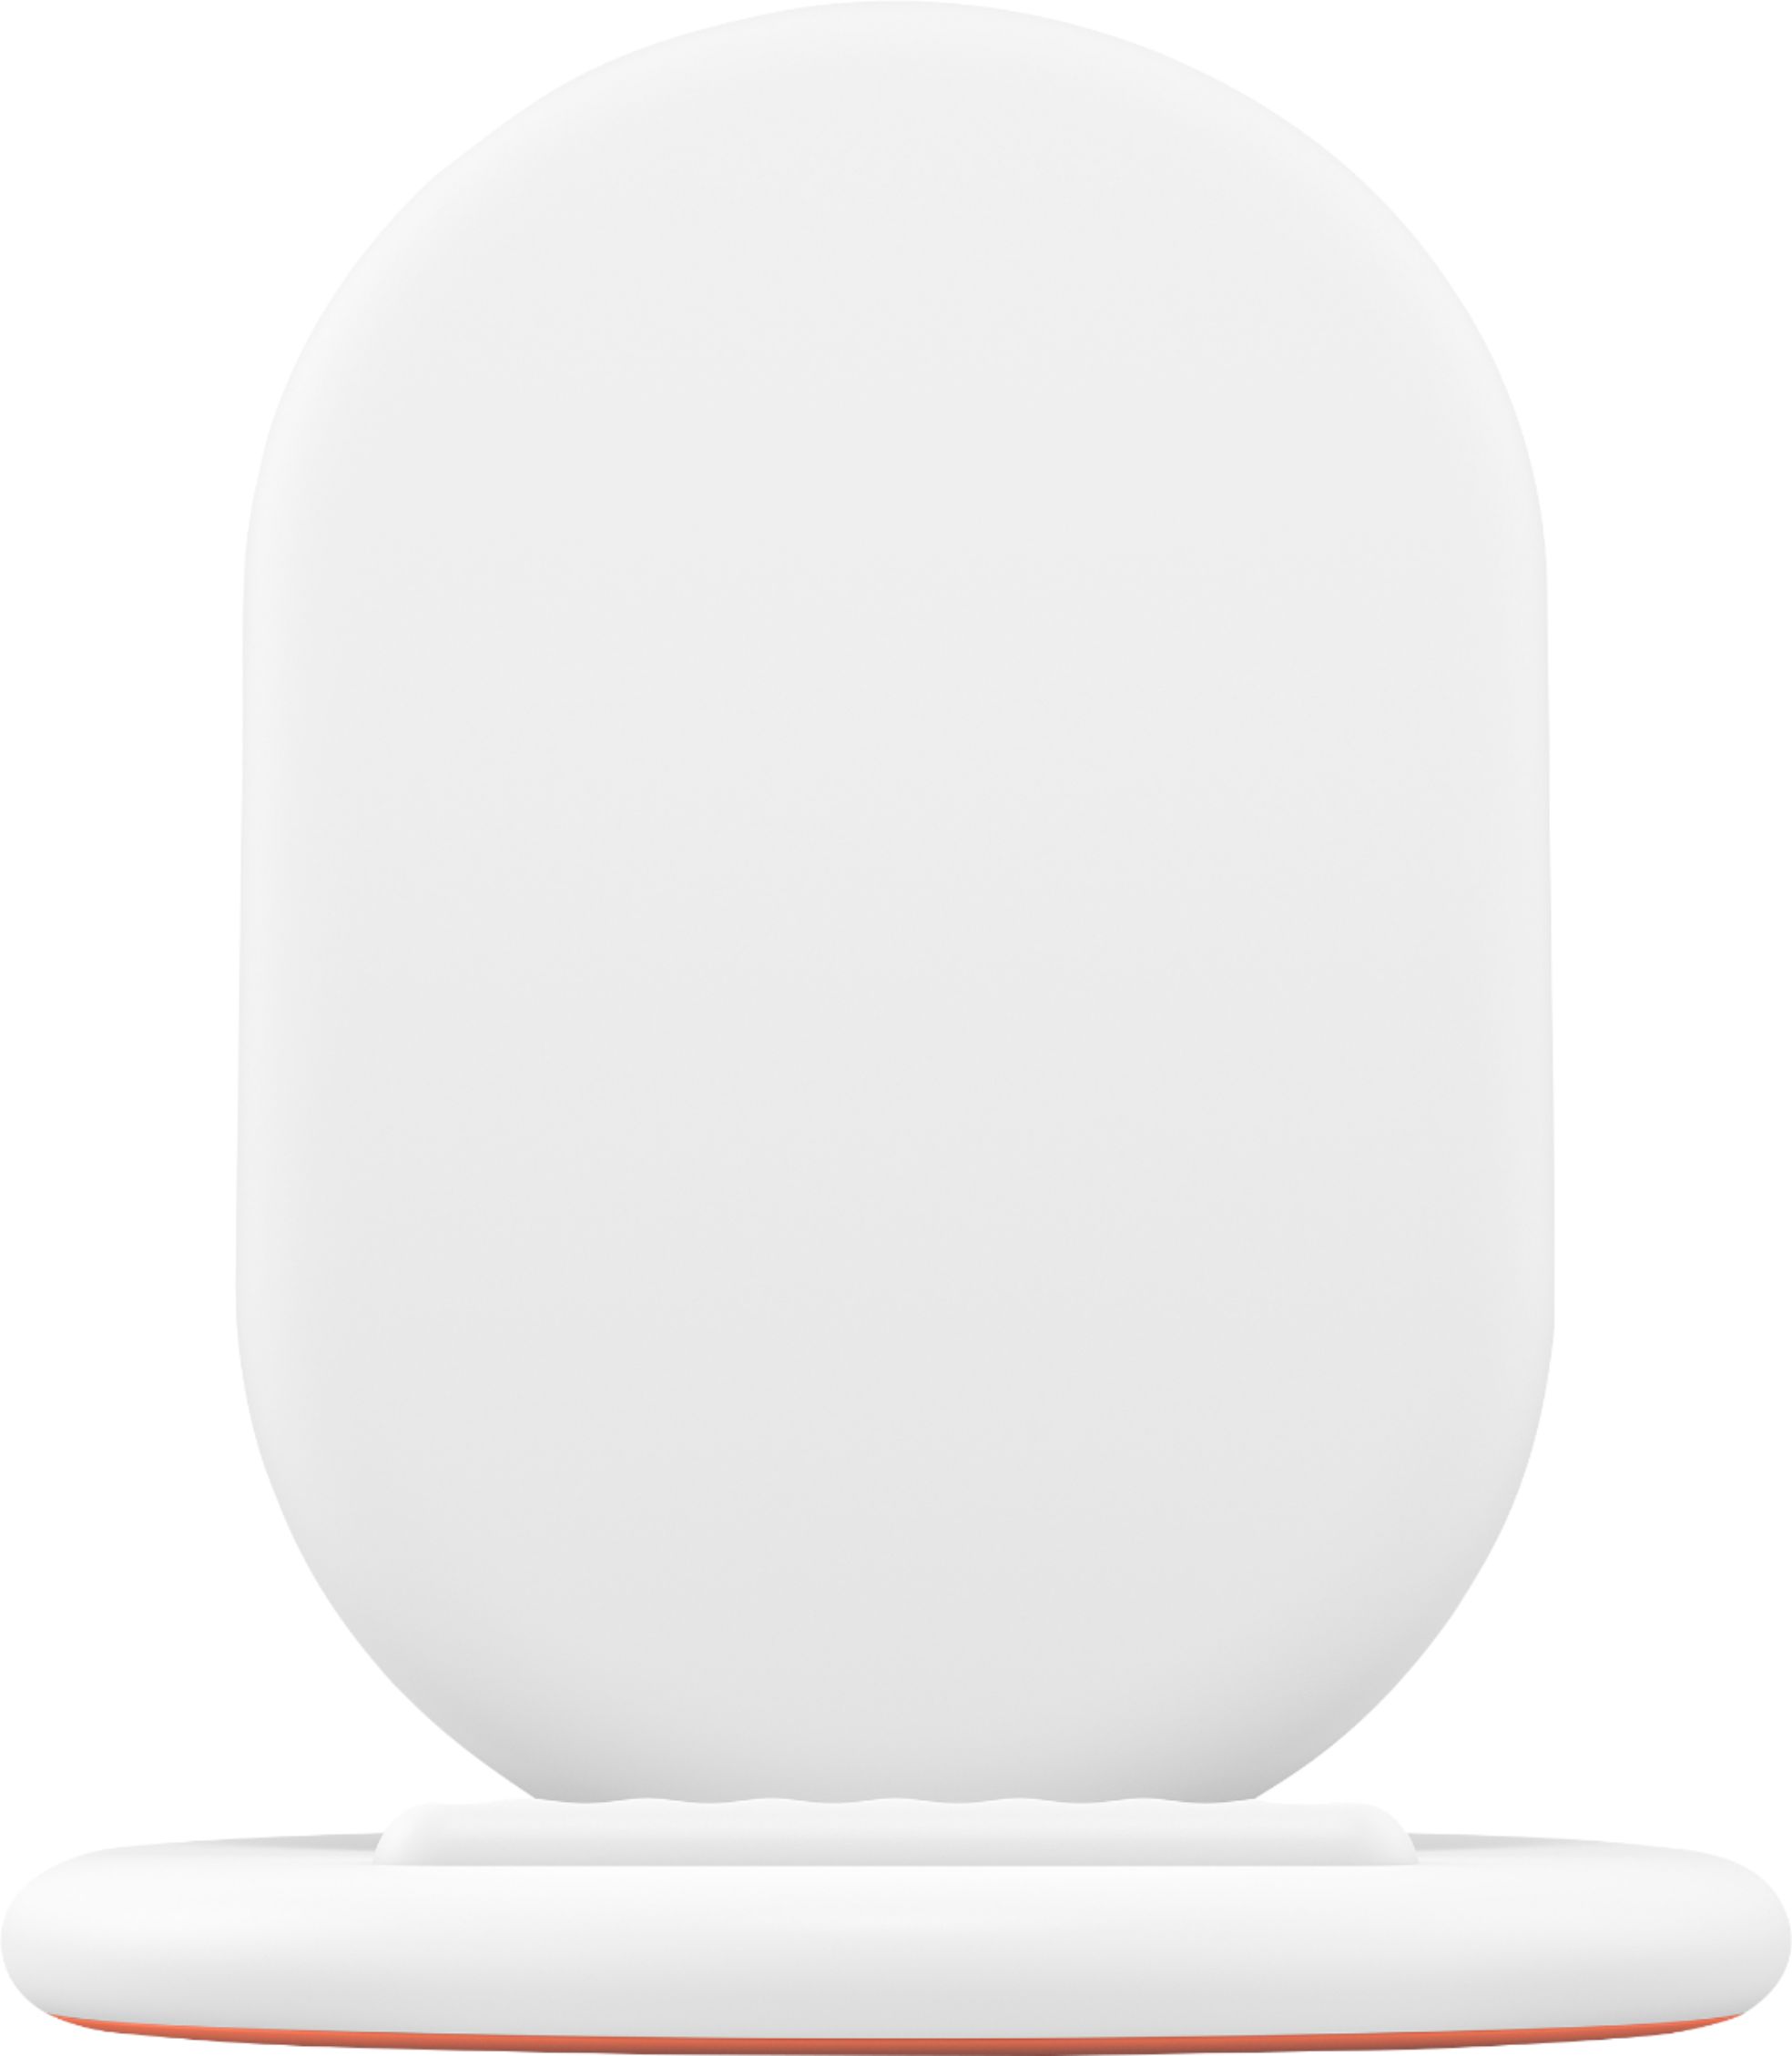  Pixel Stand for Google Pixel Cell Phones - White